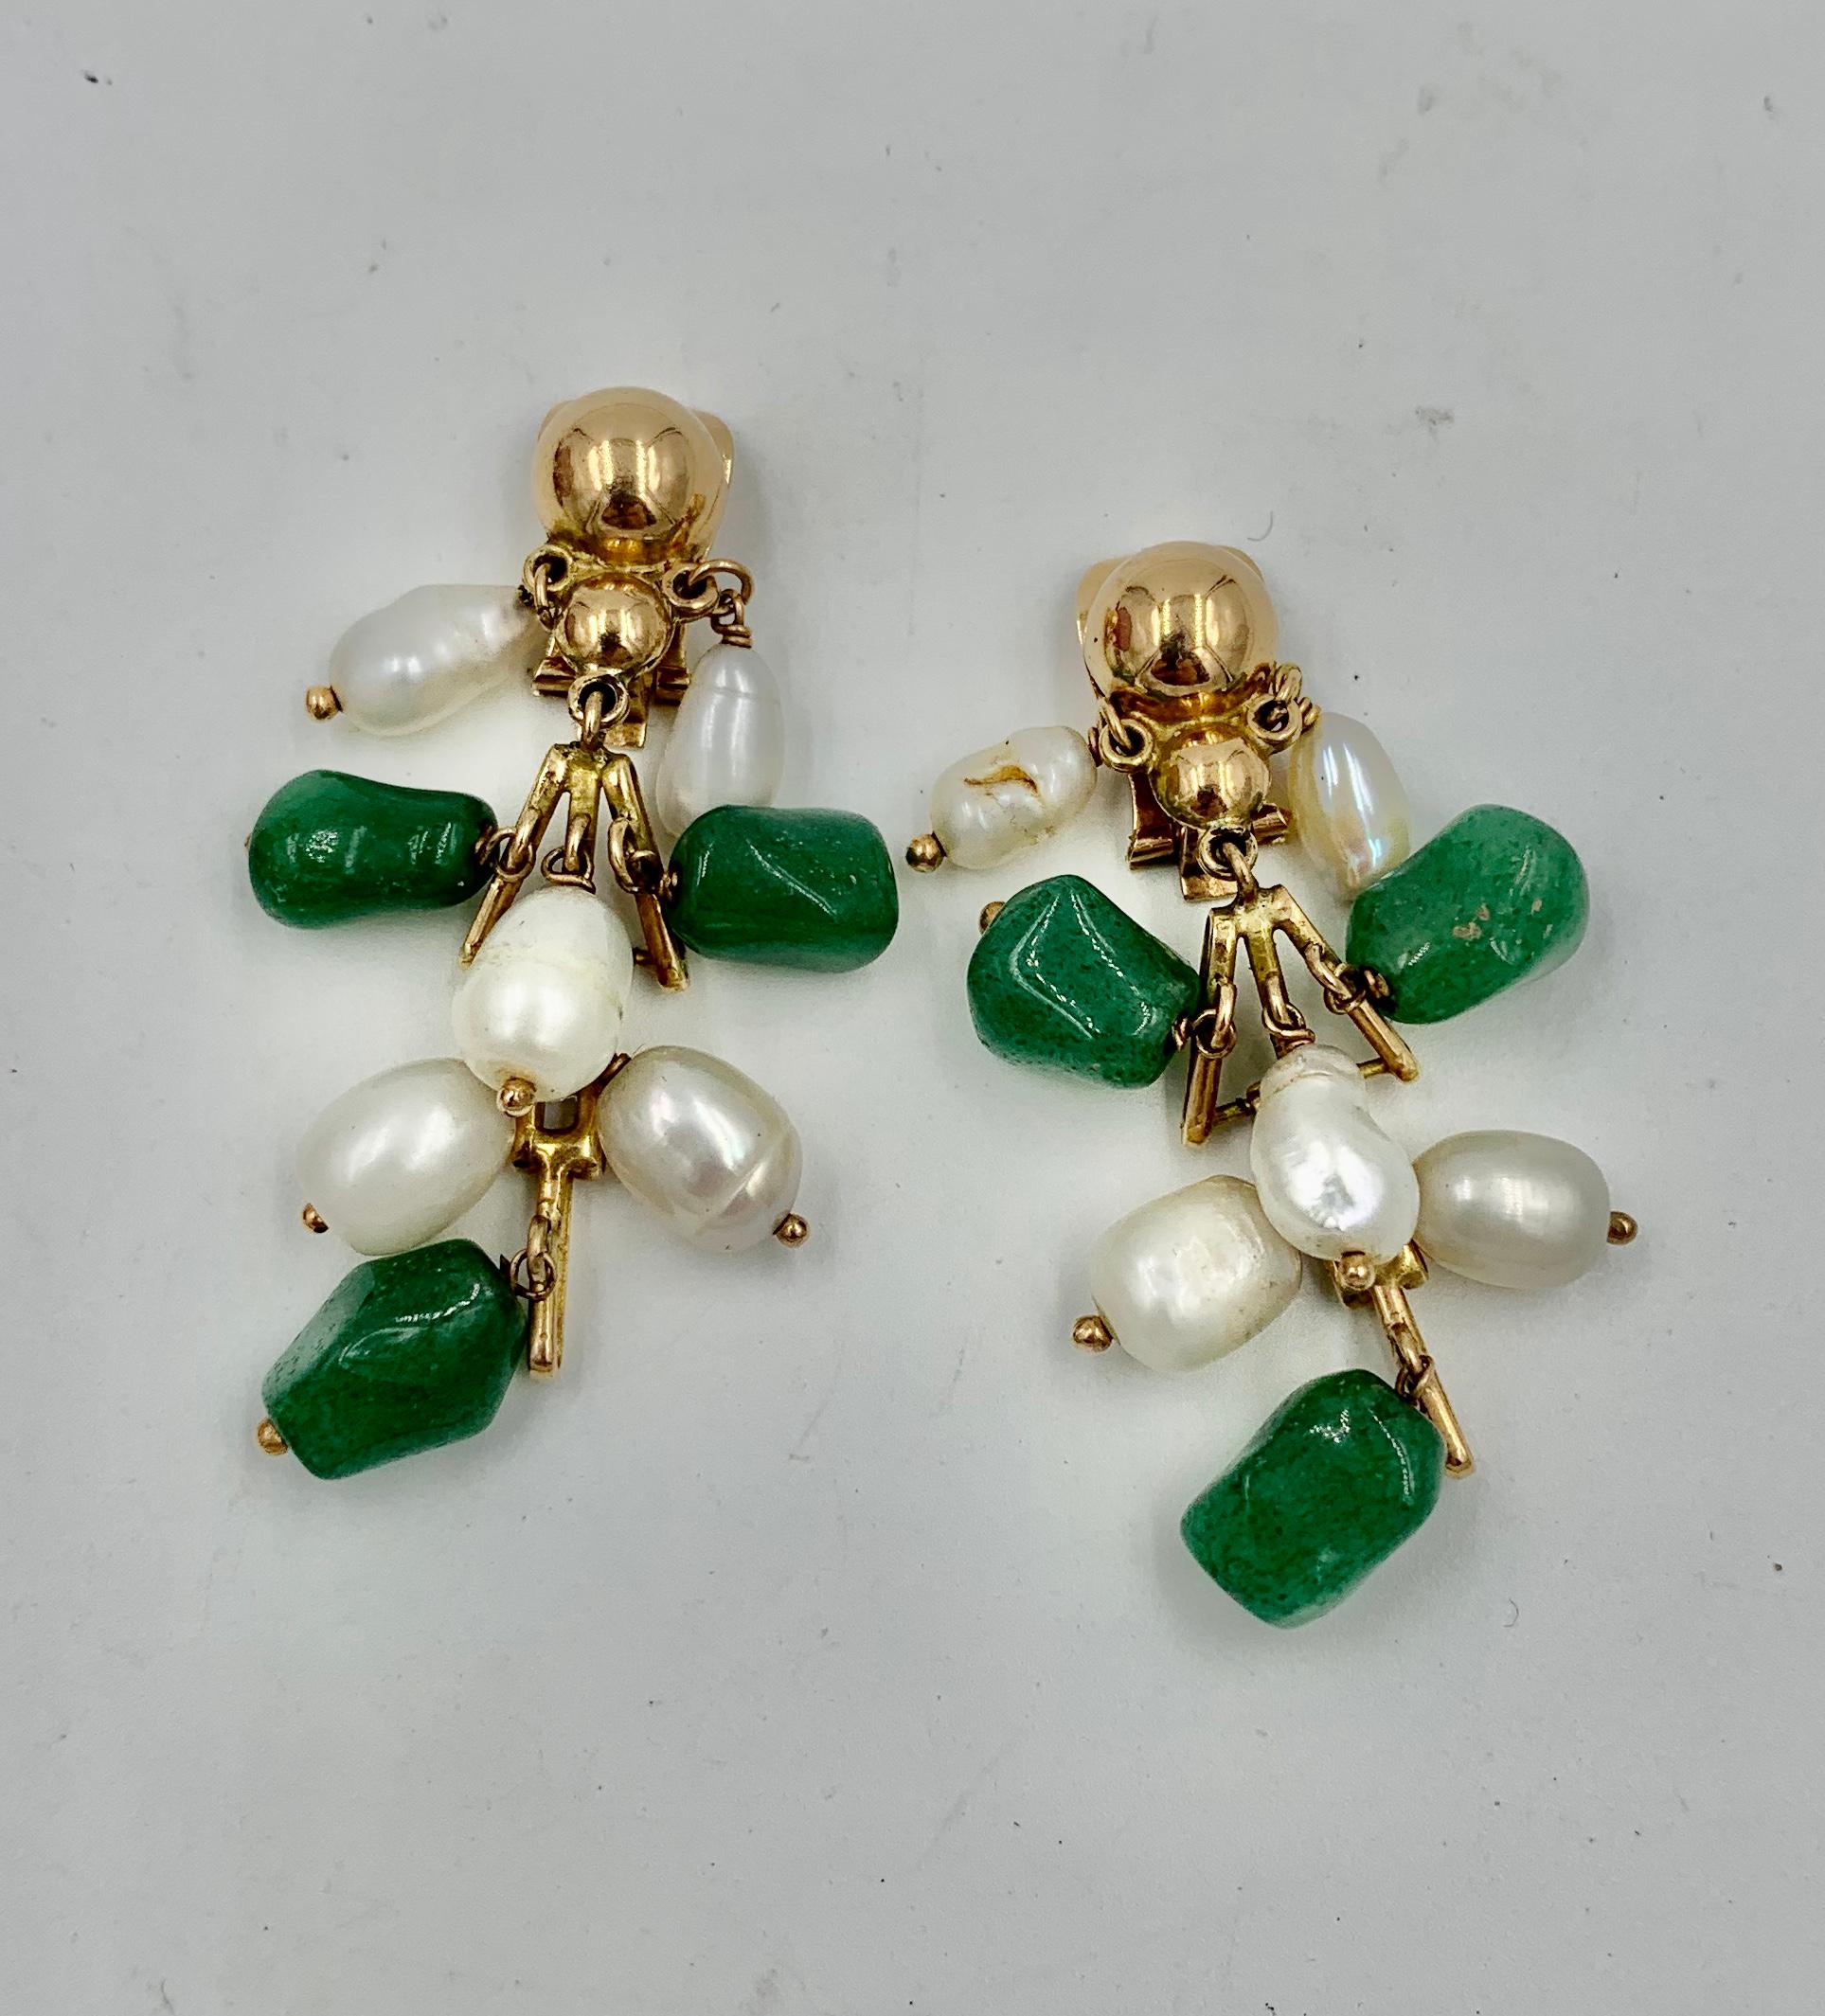 A delightful pair of Jade and Pearl Drop Dangle Earrings in 14 Karat Yellow Gold.  The retro earrings have articulated sections in 14 Karat Gold with Green Jade and Pearls hanging from the gold.  The earrings have wonderful movement and delightful